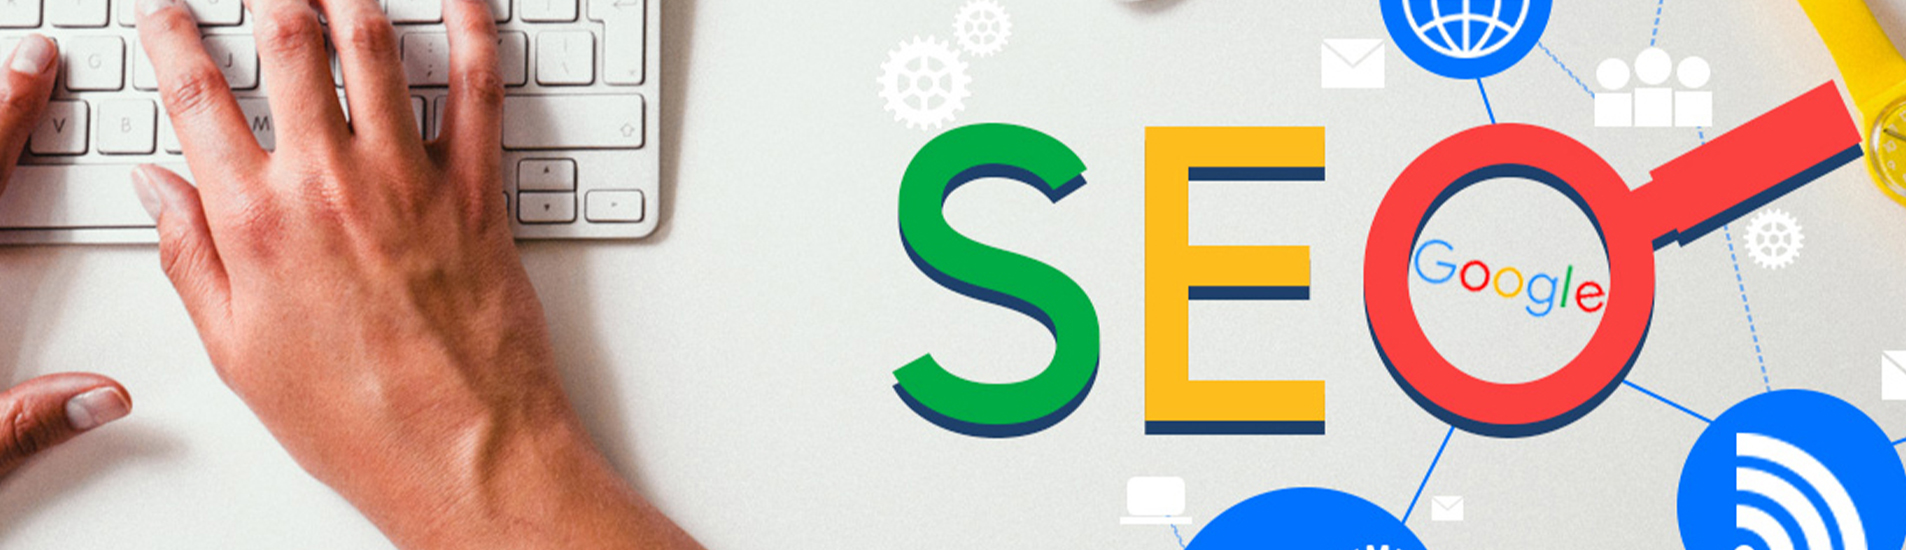 How to Hire a Search Engine Optimization (SEO) Agency?